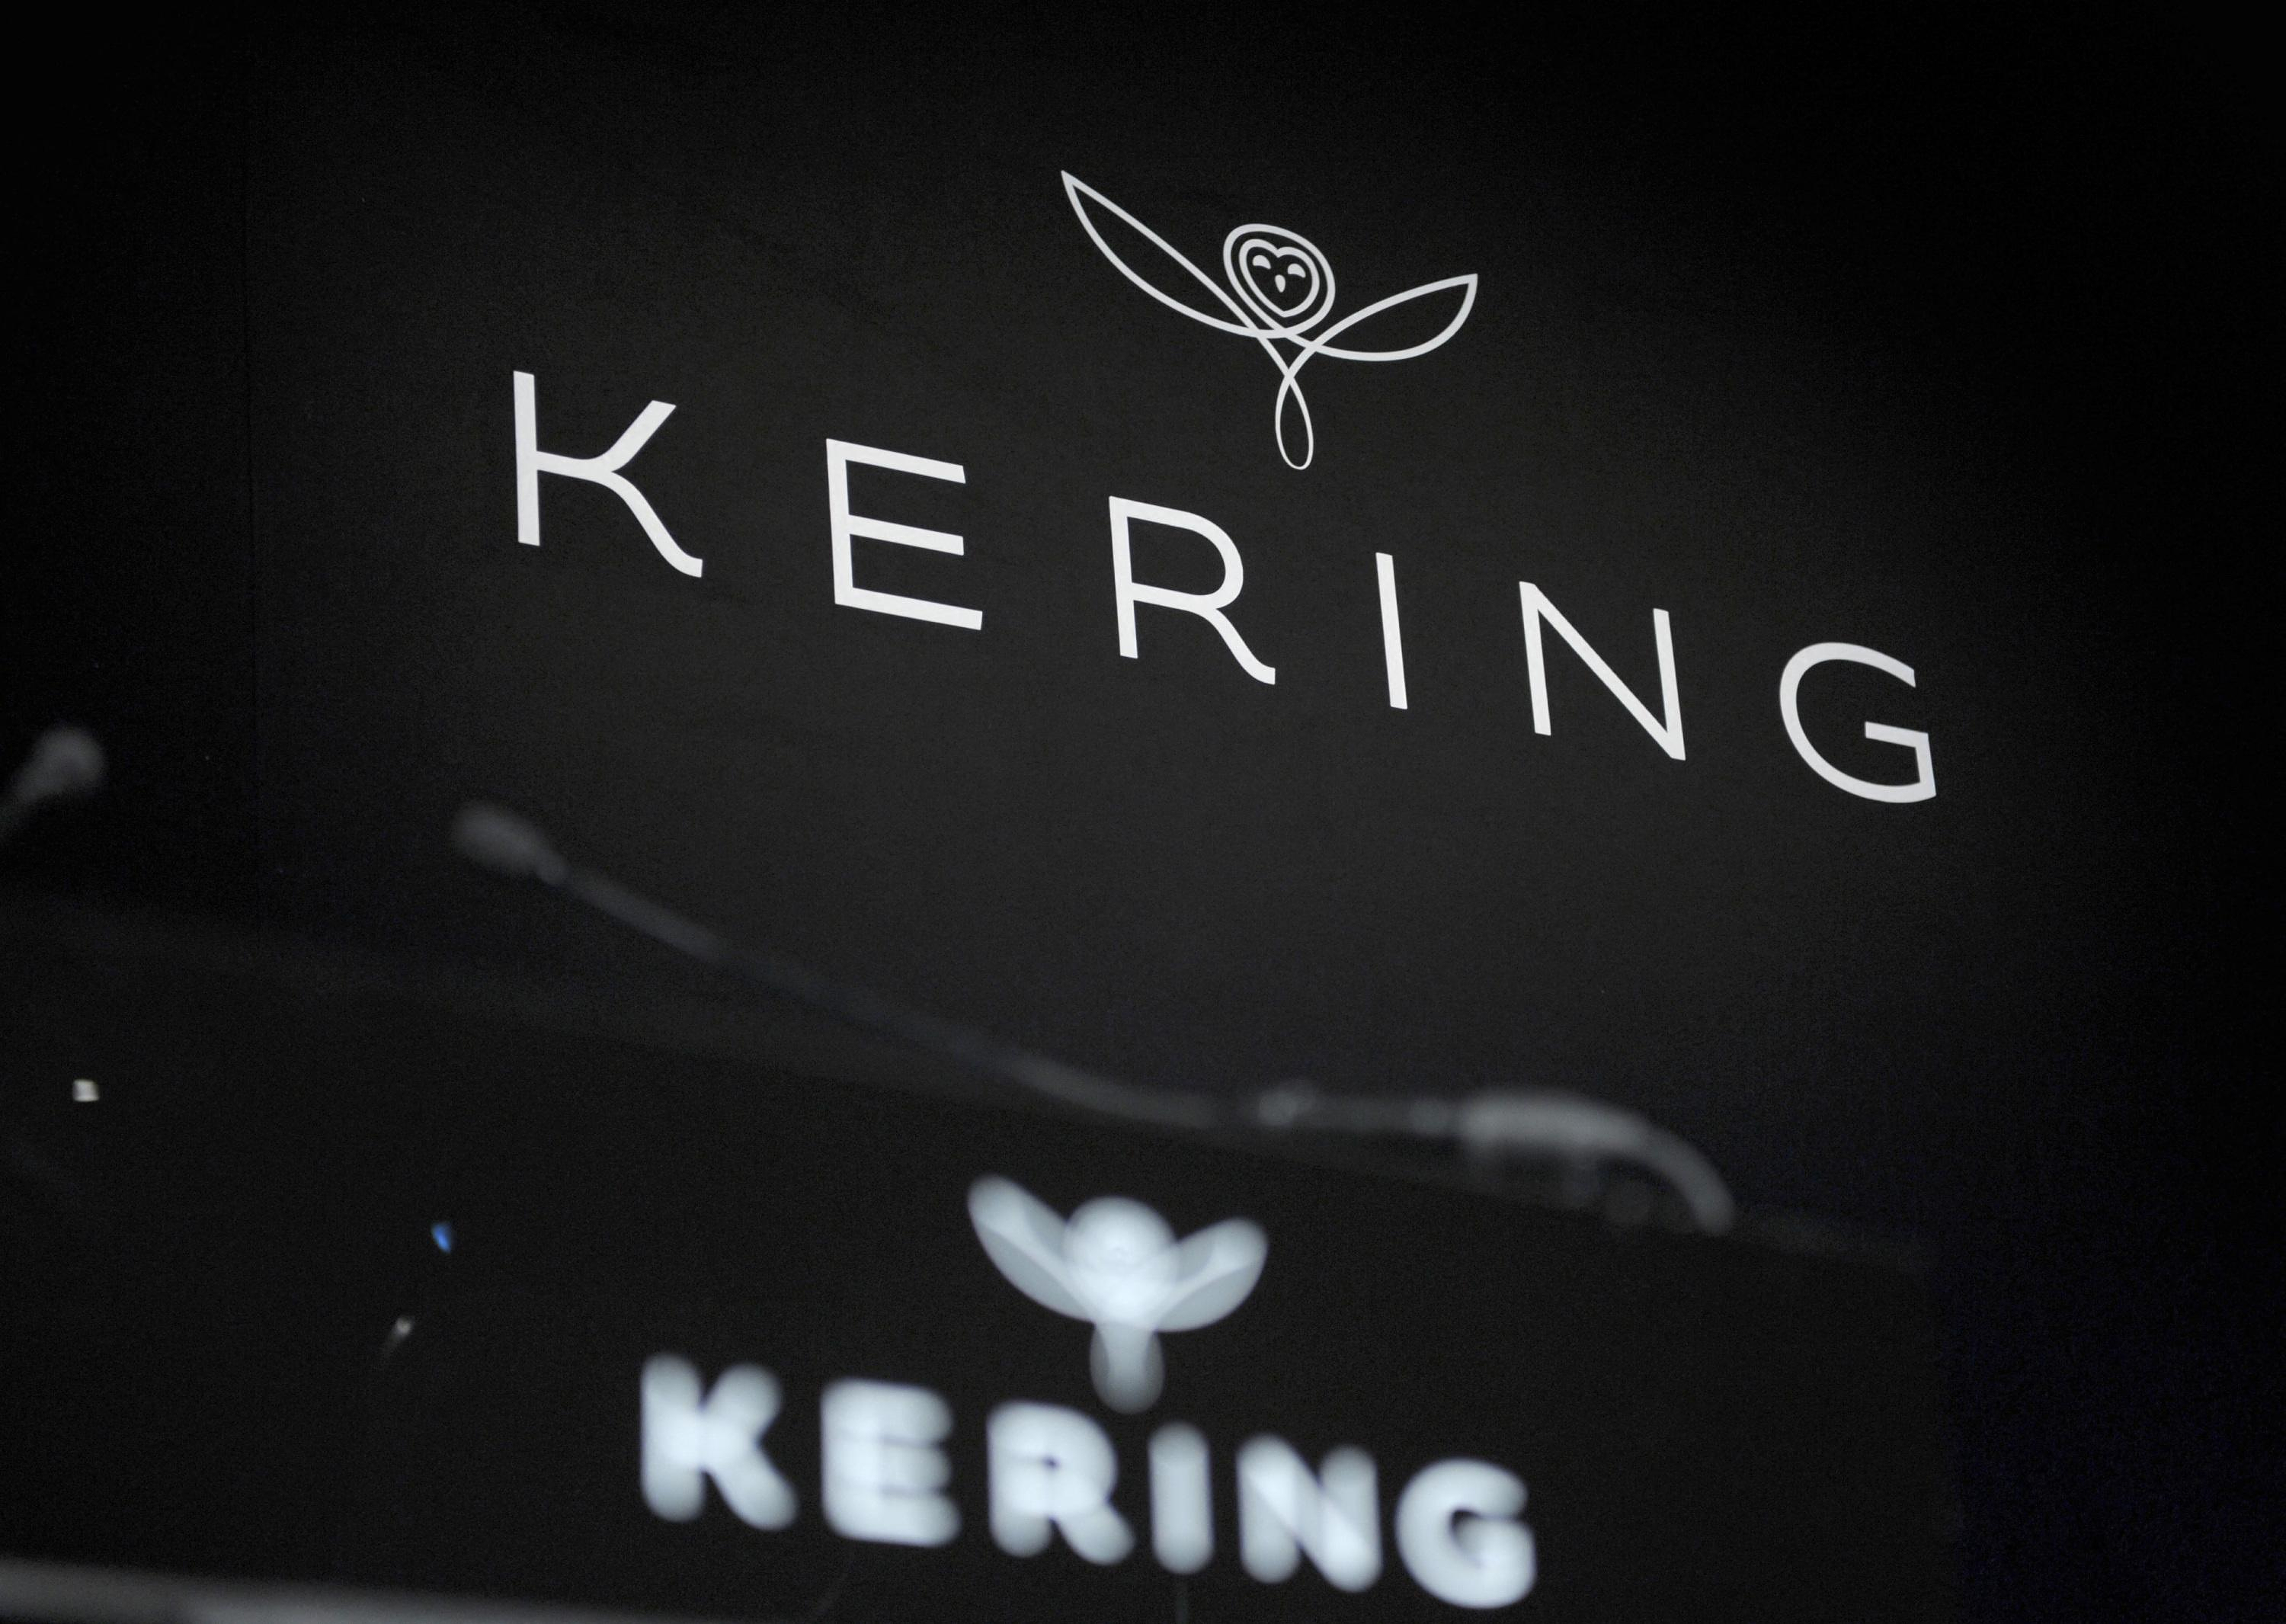 Changes in sight at Kering's board of directors